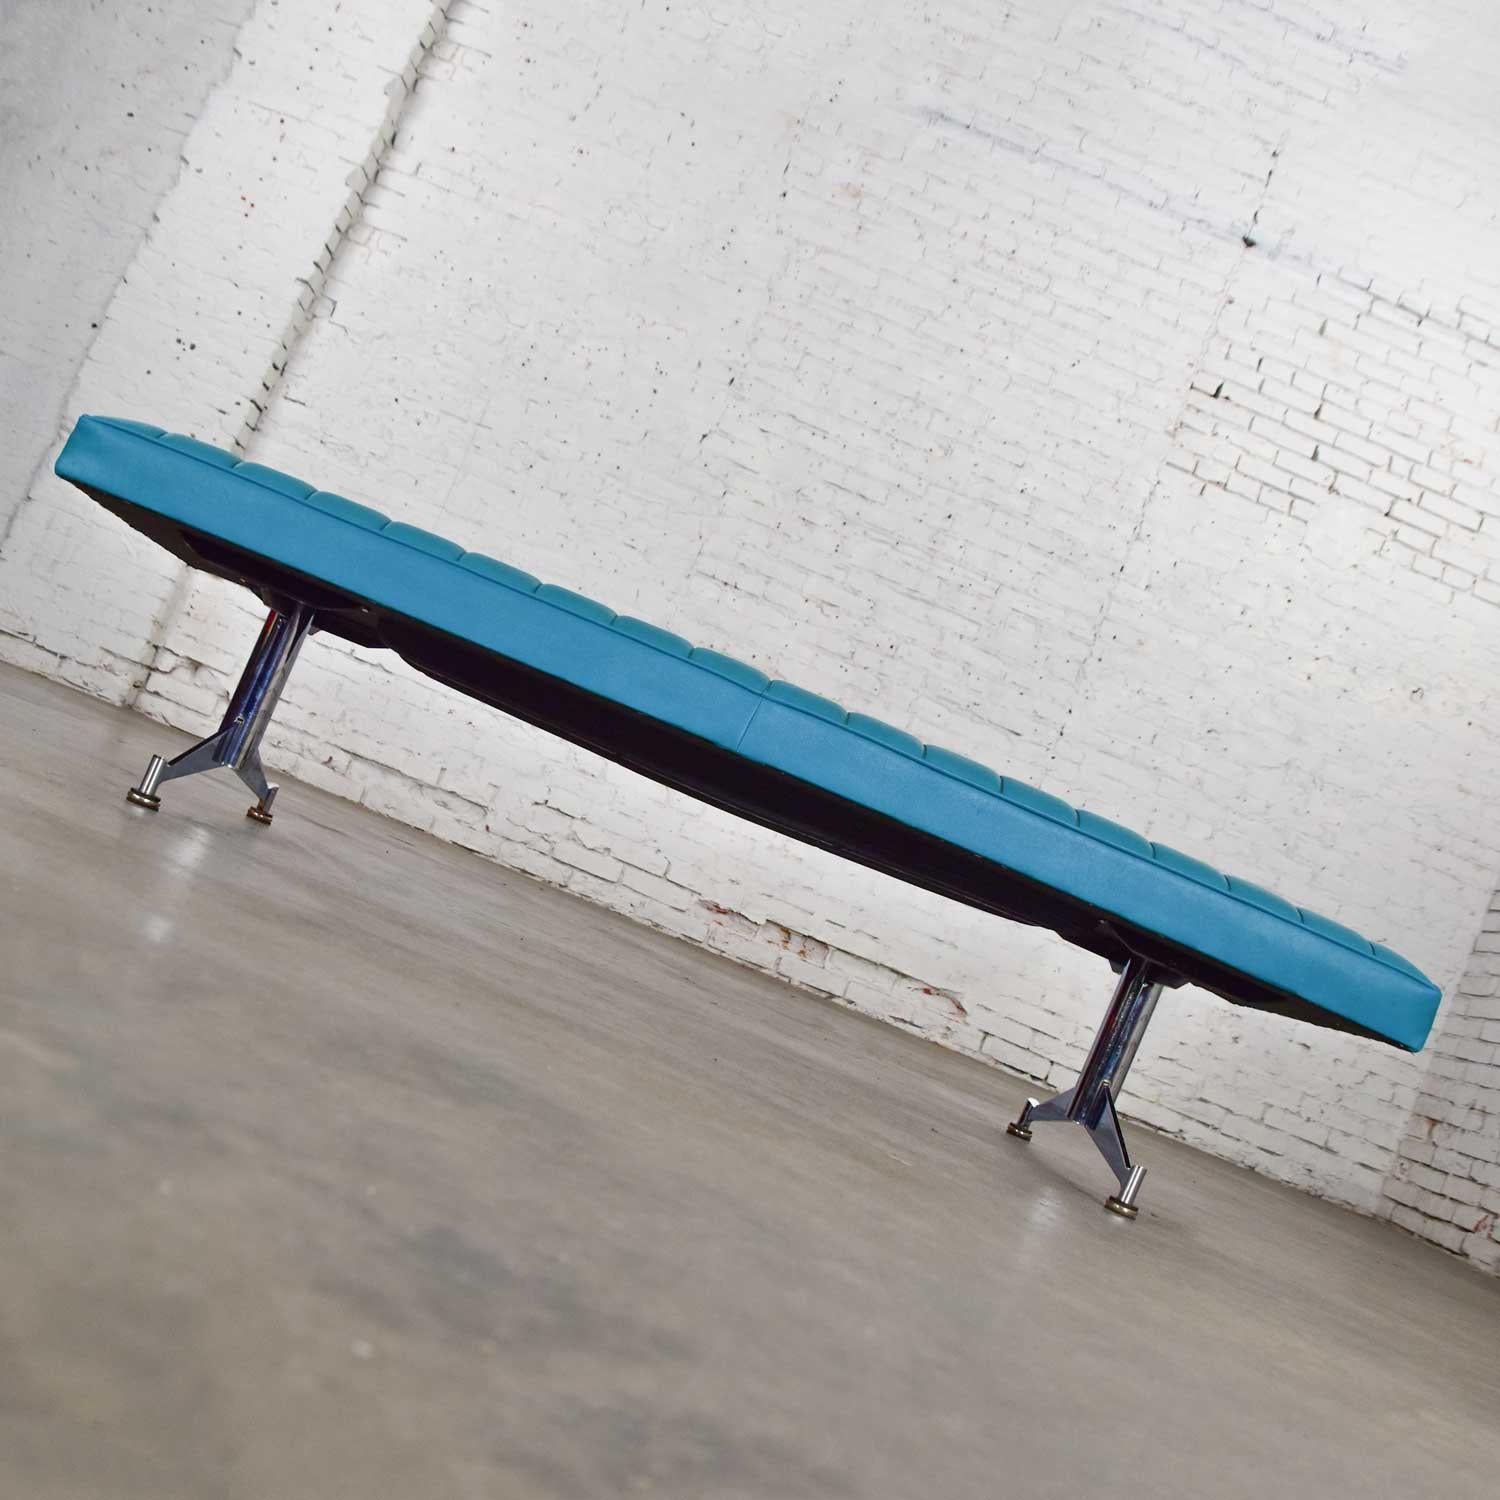 Madison Furn. Vinyl Faux Leather Turquoise Chrome Bench Daybed Style A. Umanoff For Sale 5